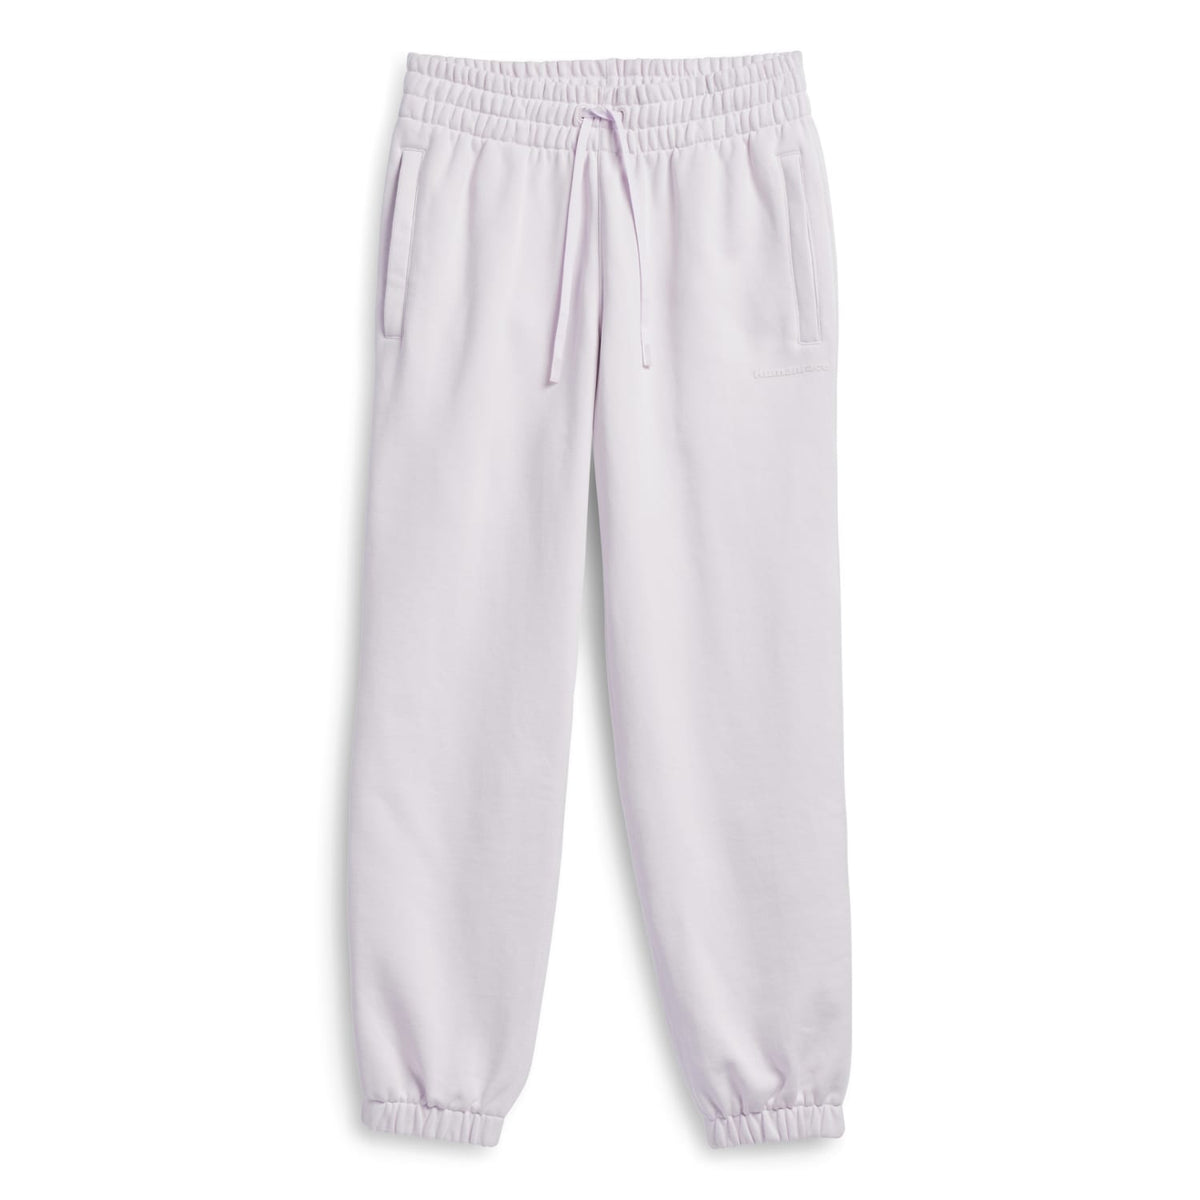 Adidas Unisex PW Basics Pant Almost Pink HS4844 - BOTTOMS - Canada